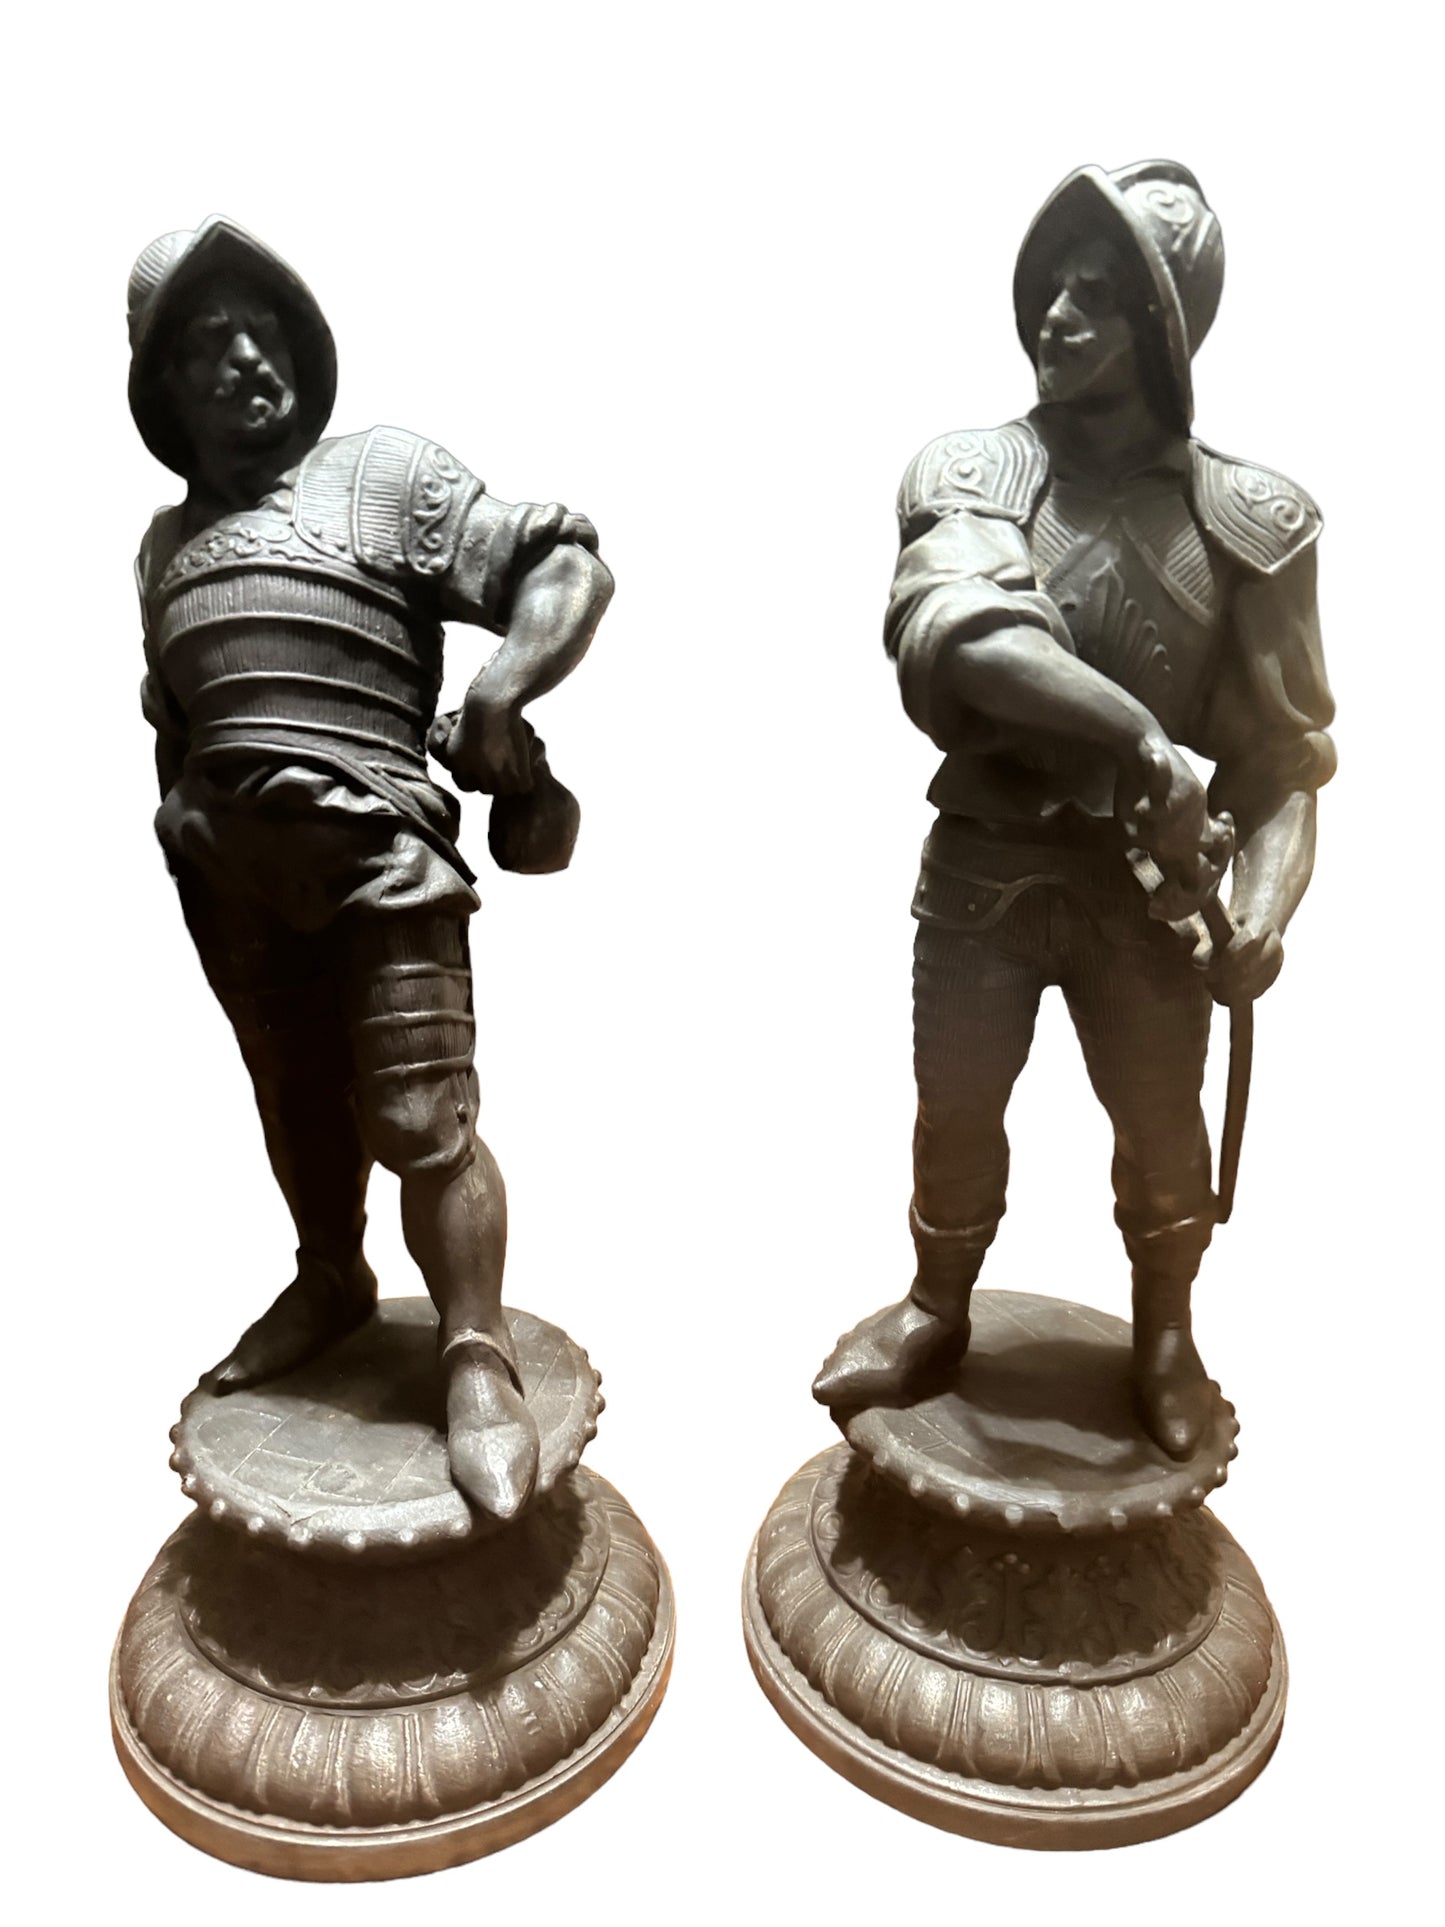 Antique Cast Metal Spelter Statues of Spanish Conquistador Soldiers in Pose